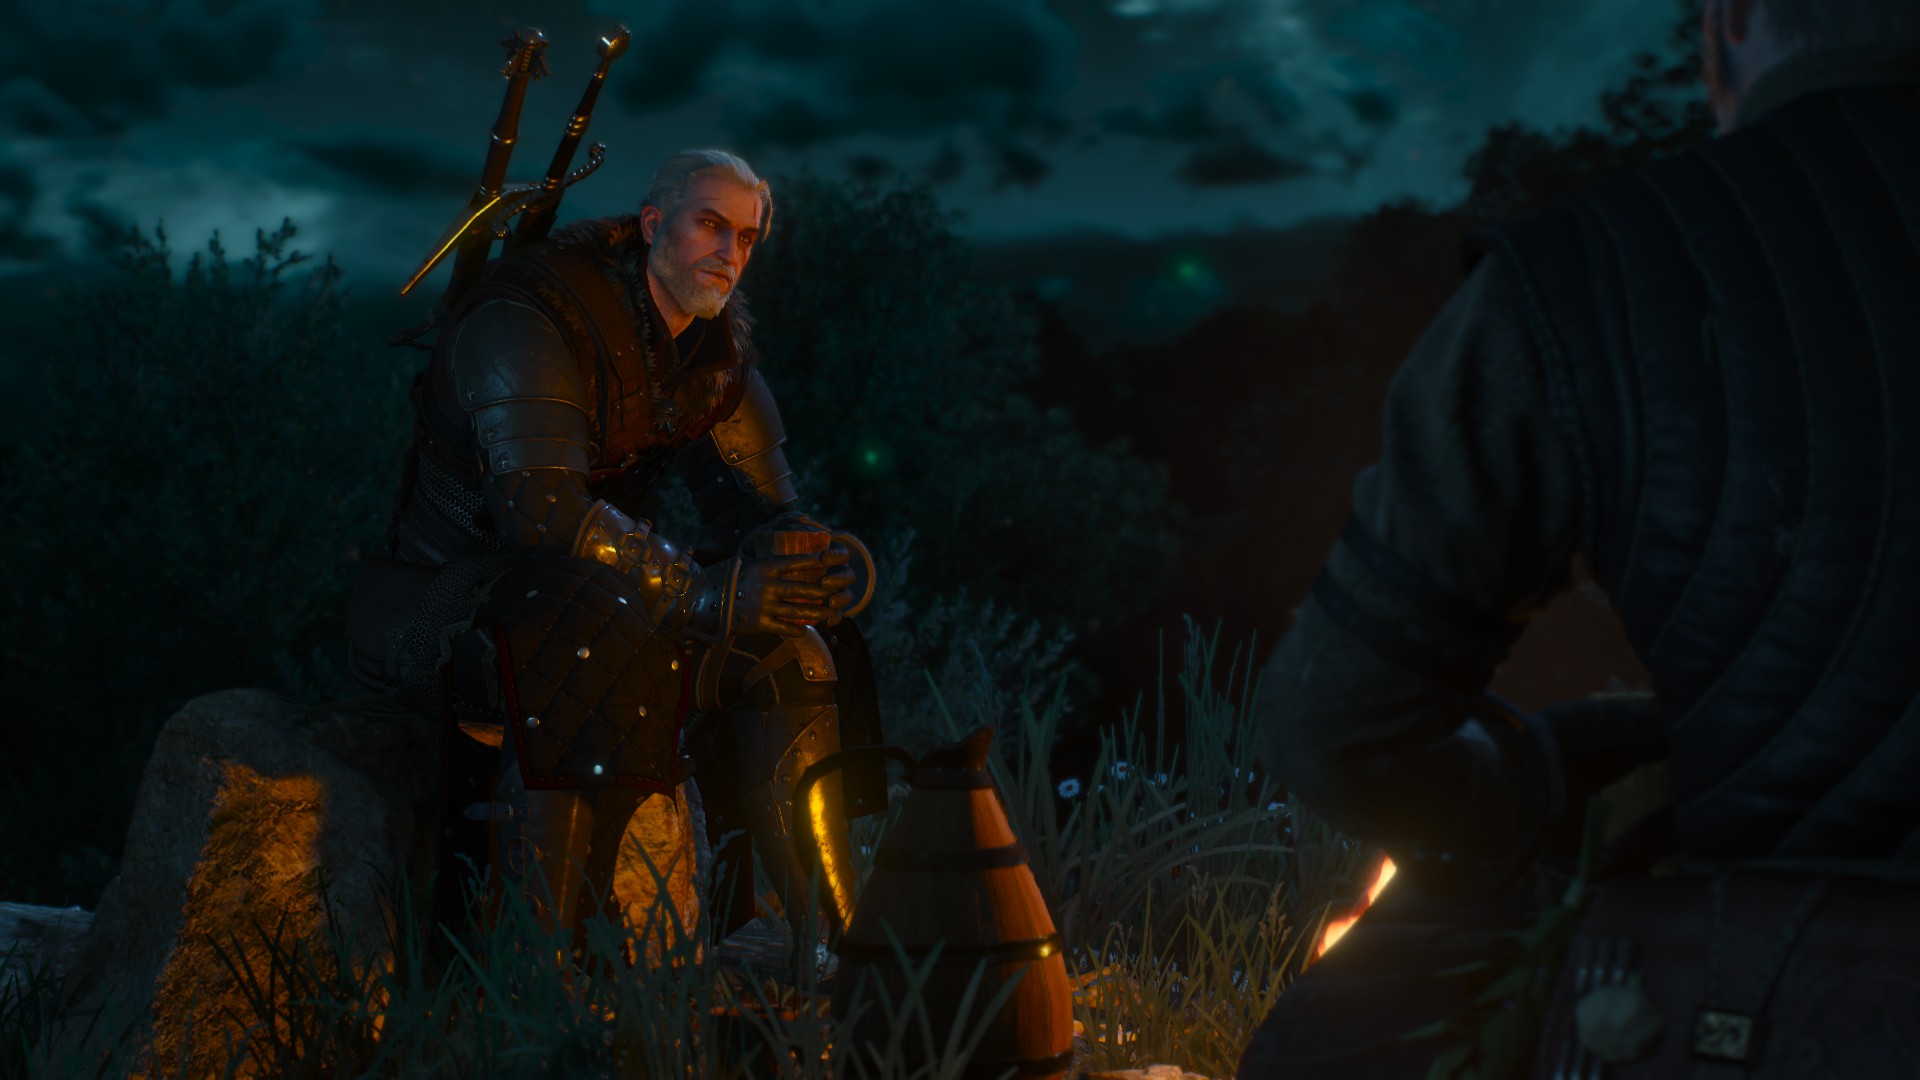 General 1920x1080 The Witcher 3: Wild Hunt The Witcher 3: Wild Hunt - Blood and Wine Toussaint Geralt of Rivia The Witcher CD Projekt RED video games video game characters Book characters